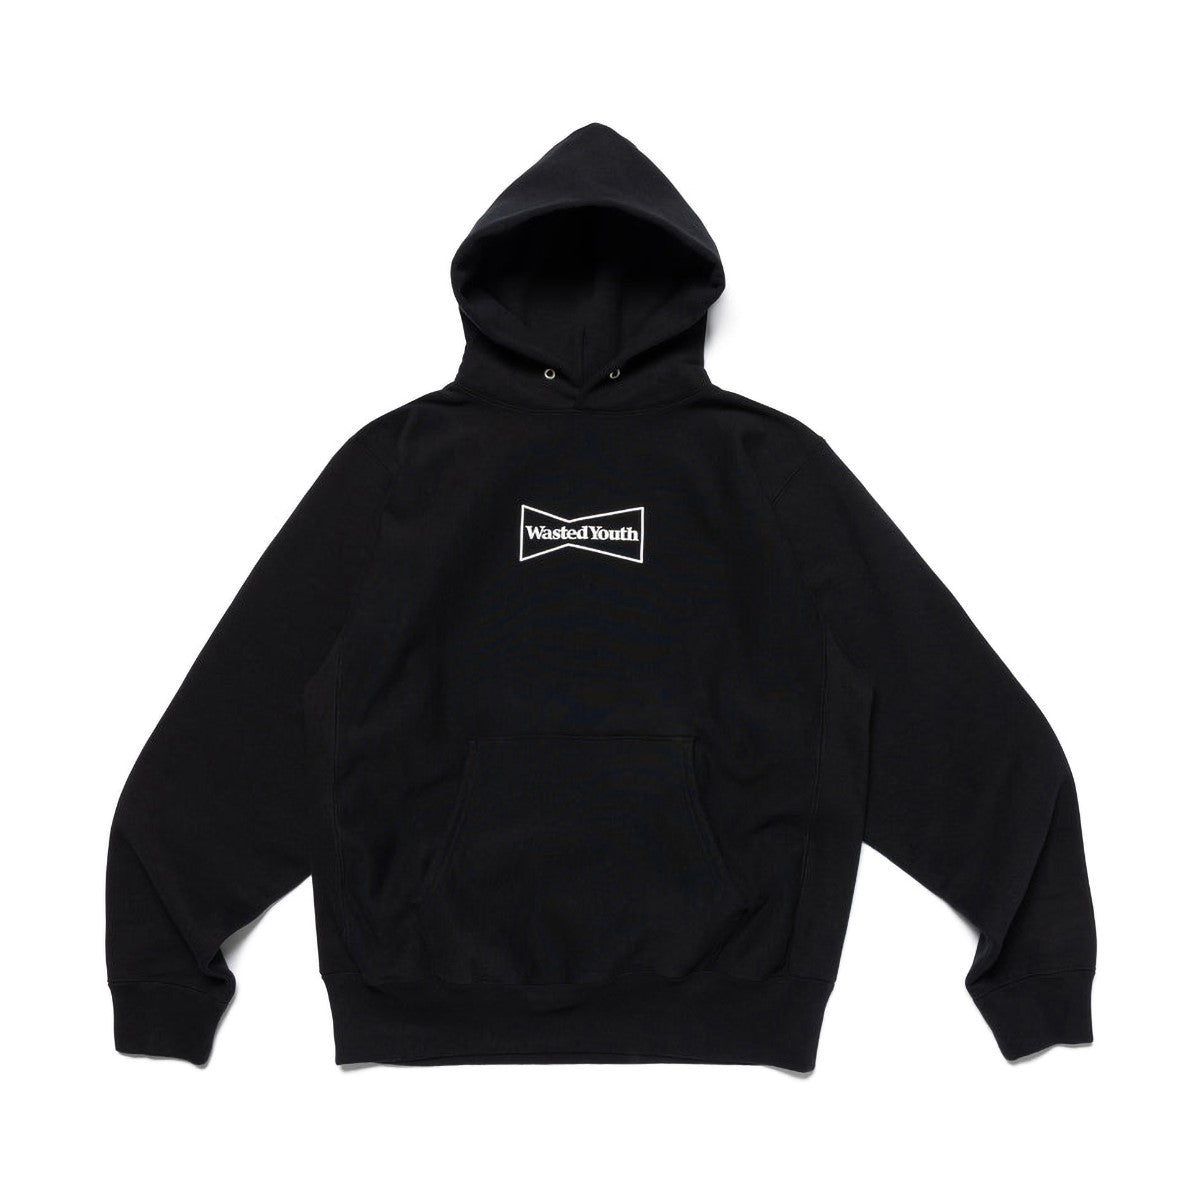 Wasted Youth Hoodie #2 Black XL - パーカー